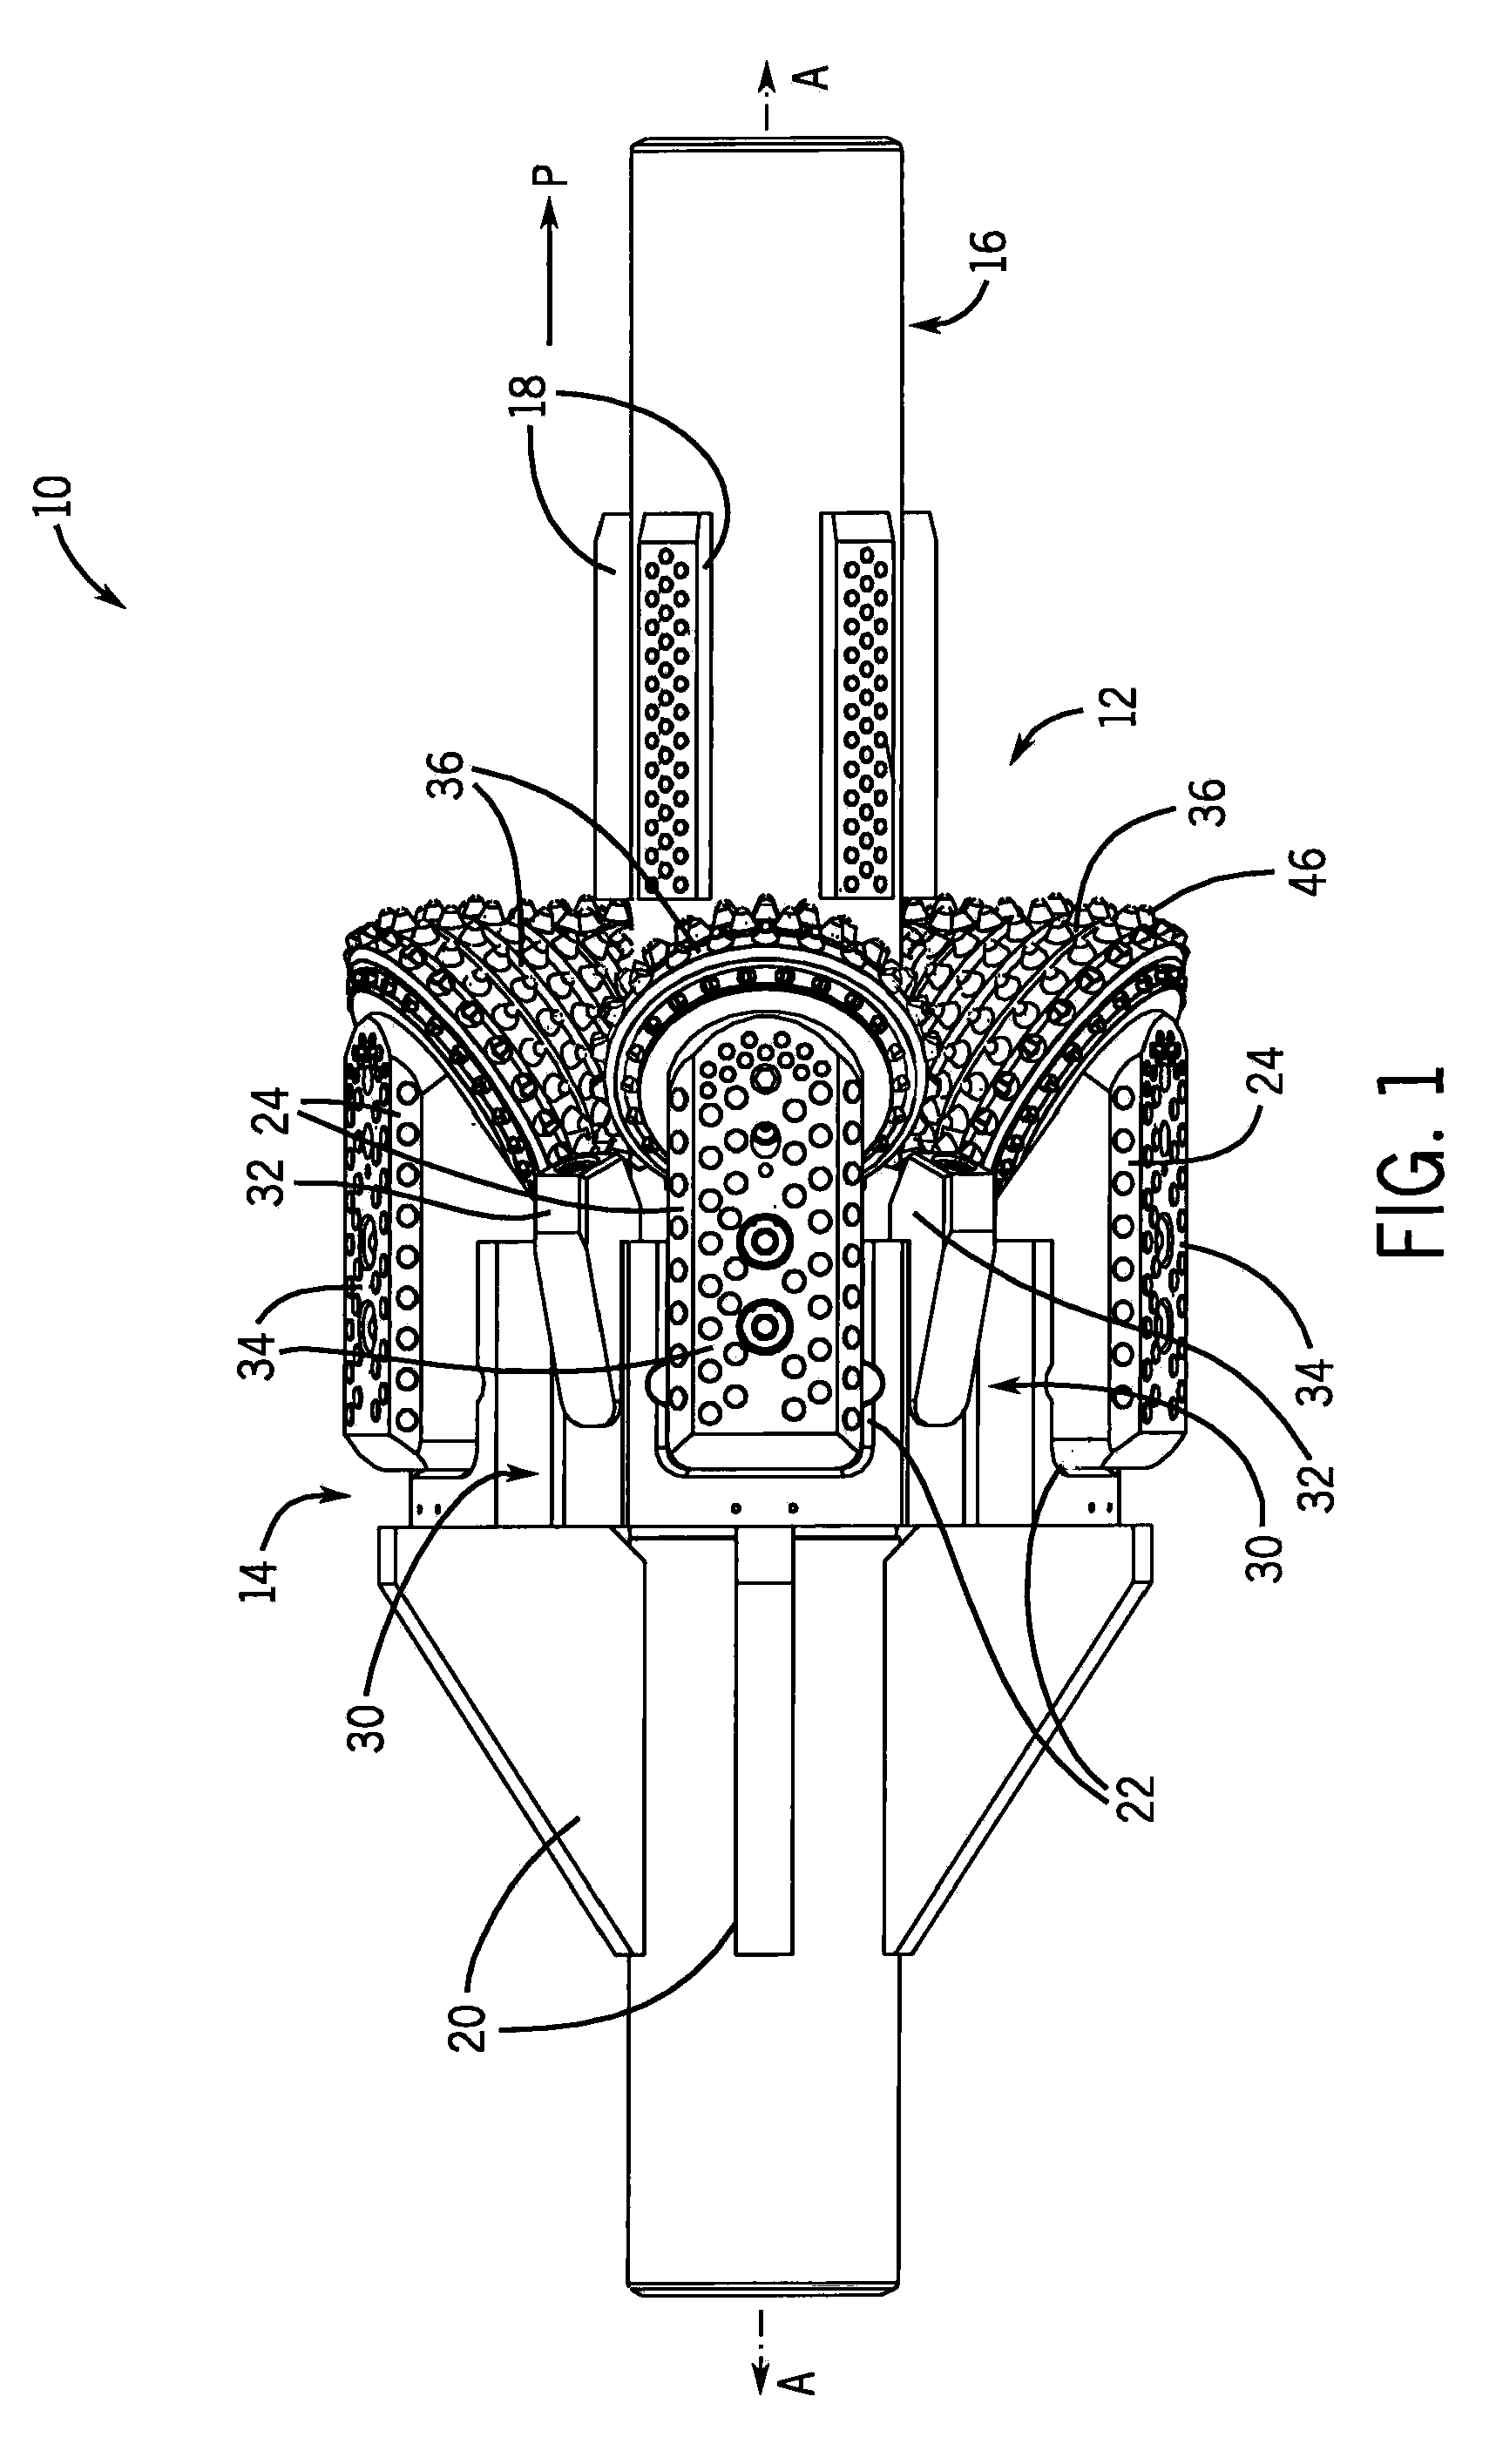 Hole opener assembly and a cone arm forming a part thereof